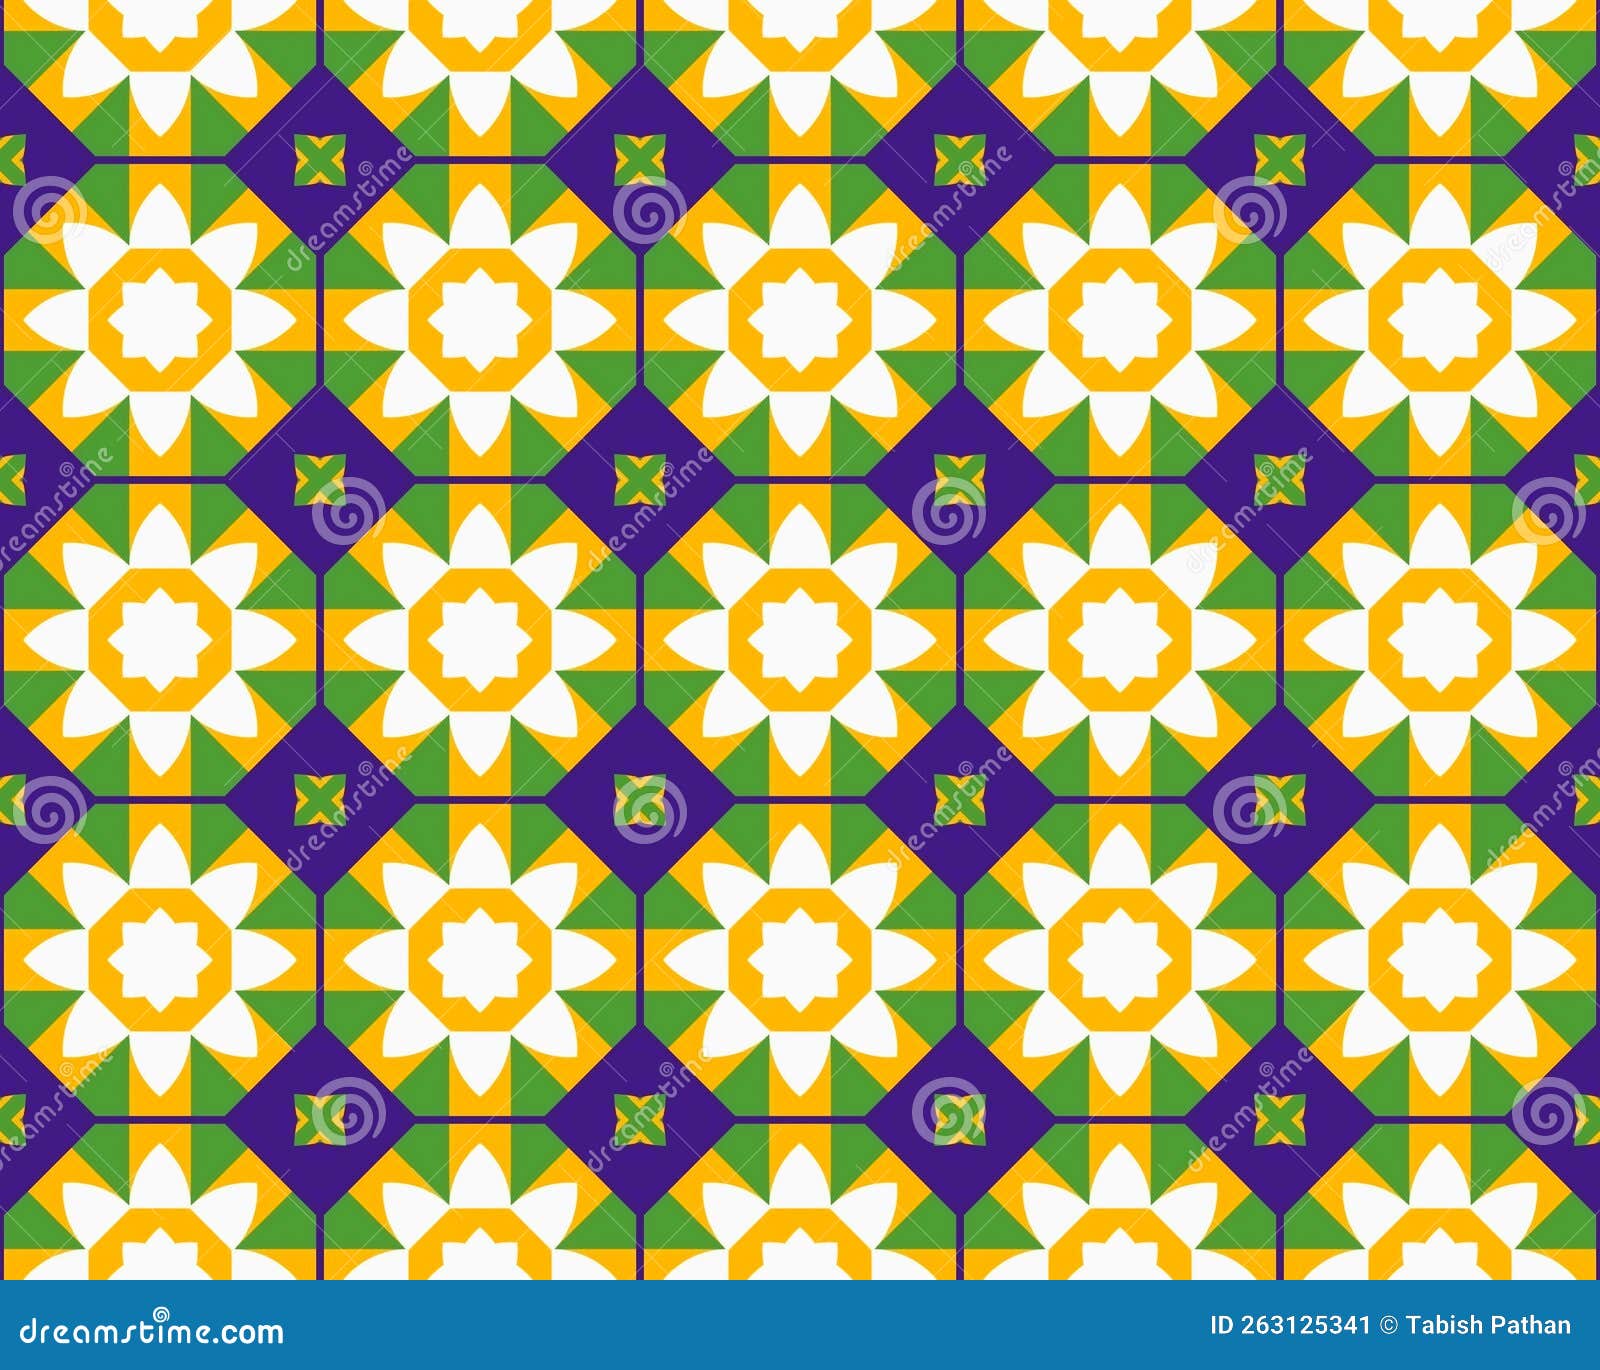 oriental ethnic geometric seamless tile pattern made with various traditional s style 